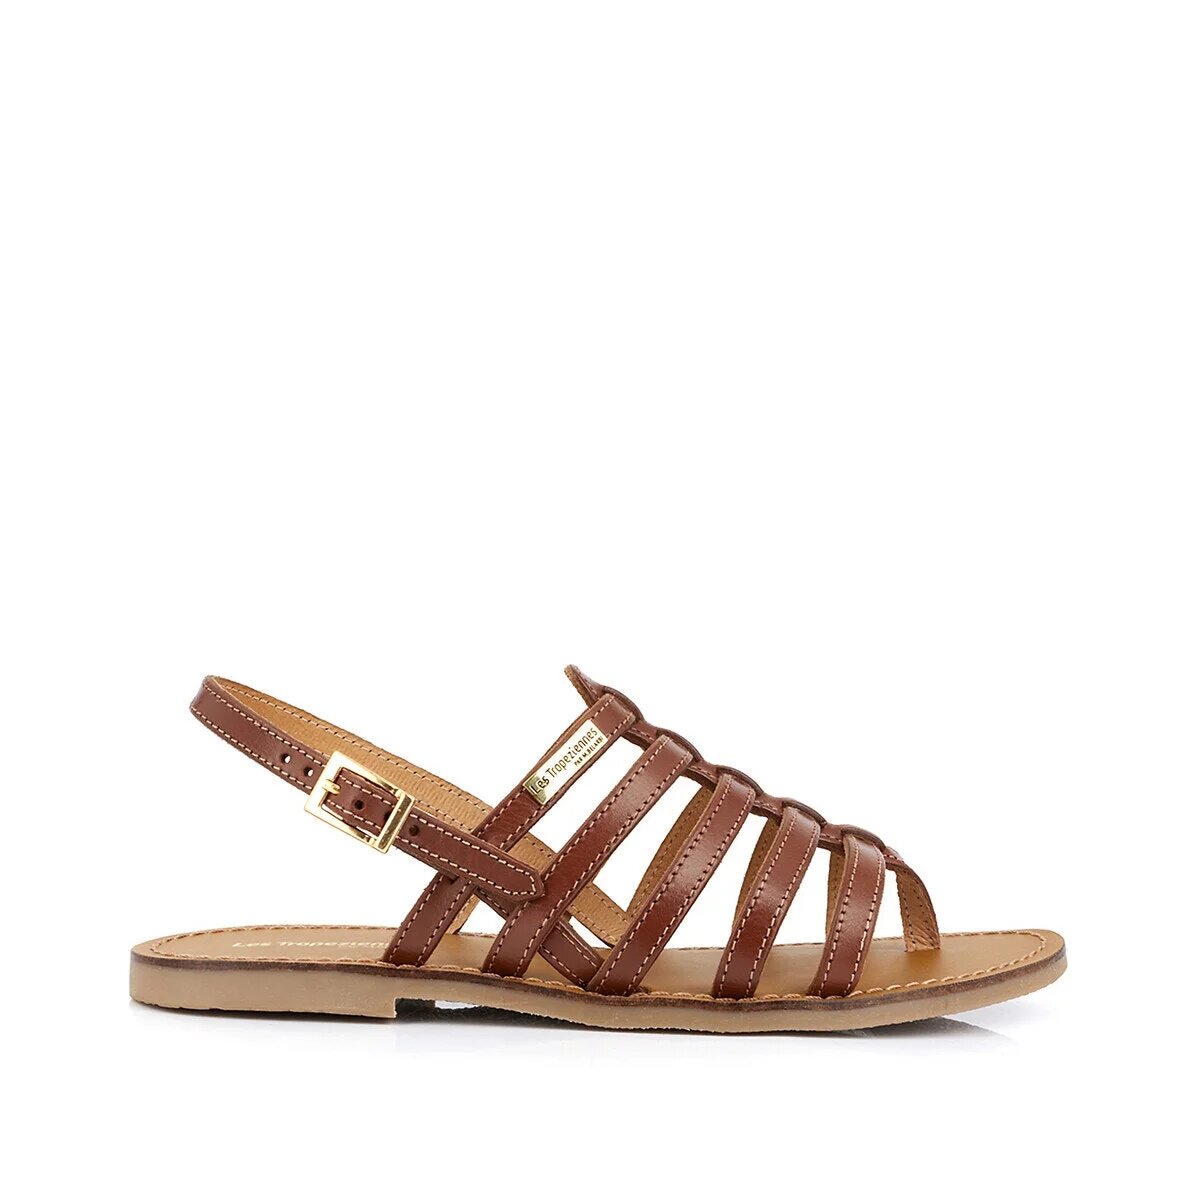 Brown leather Tropezienne sandals by M Belarbi